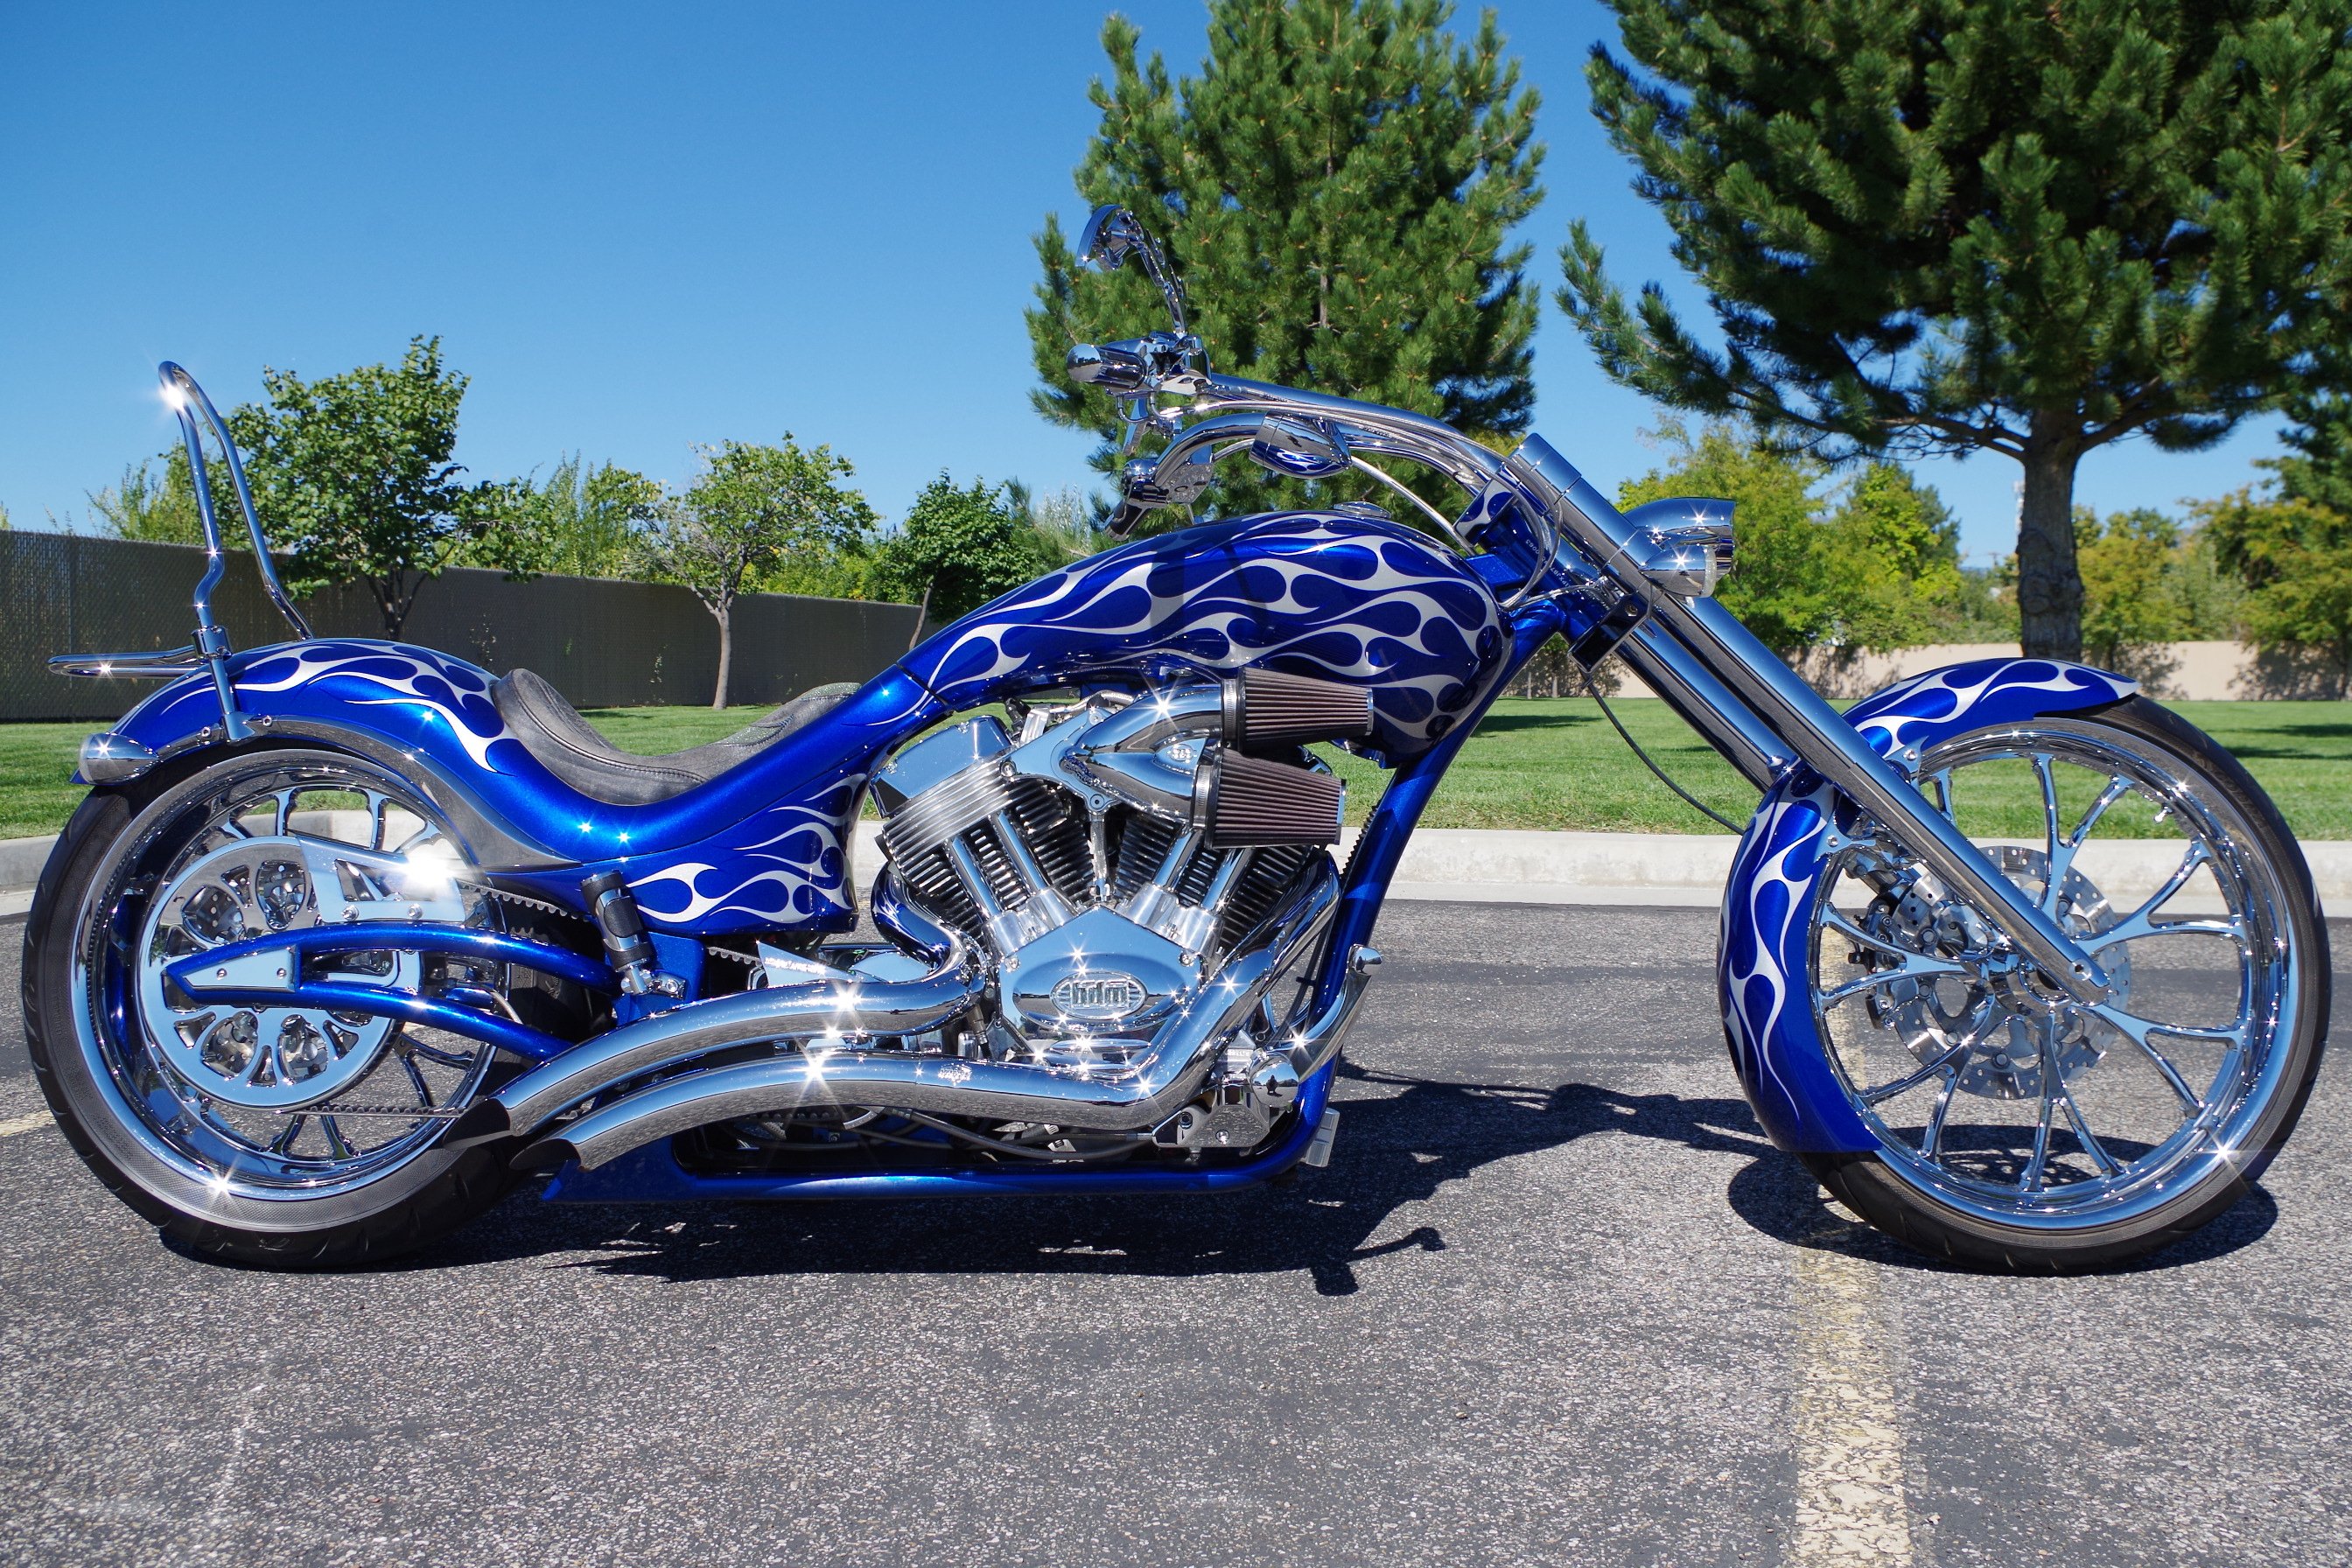 View, Download, Rate, and Comment on this Chopper Image. image,images,pic,p...